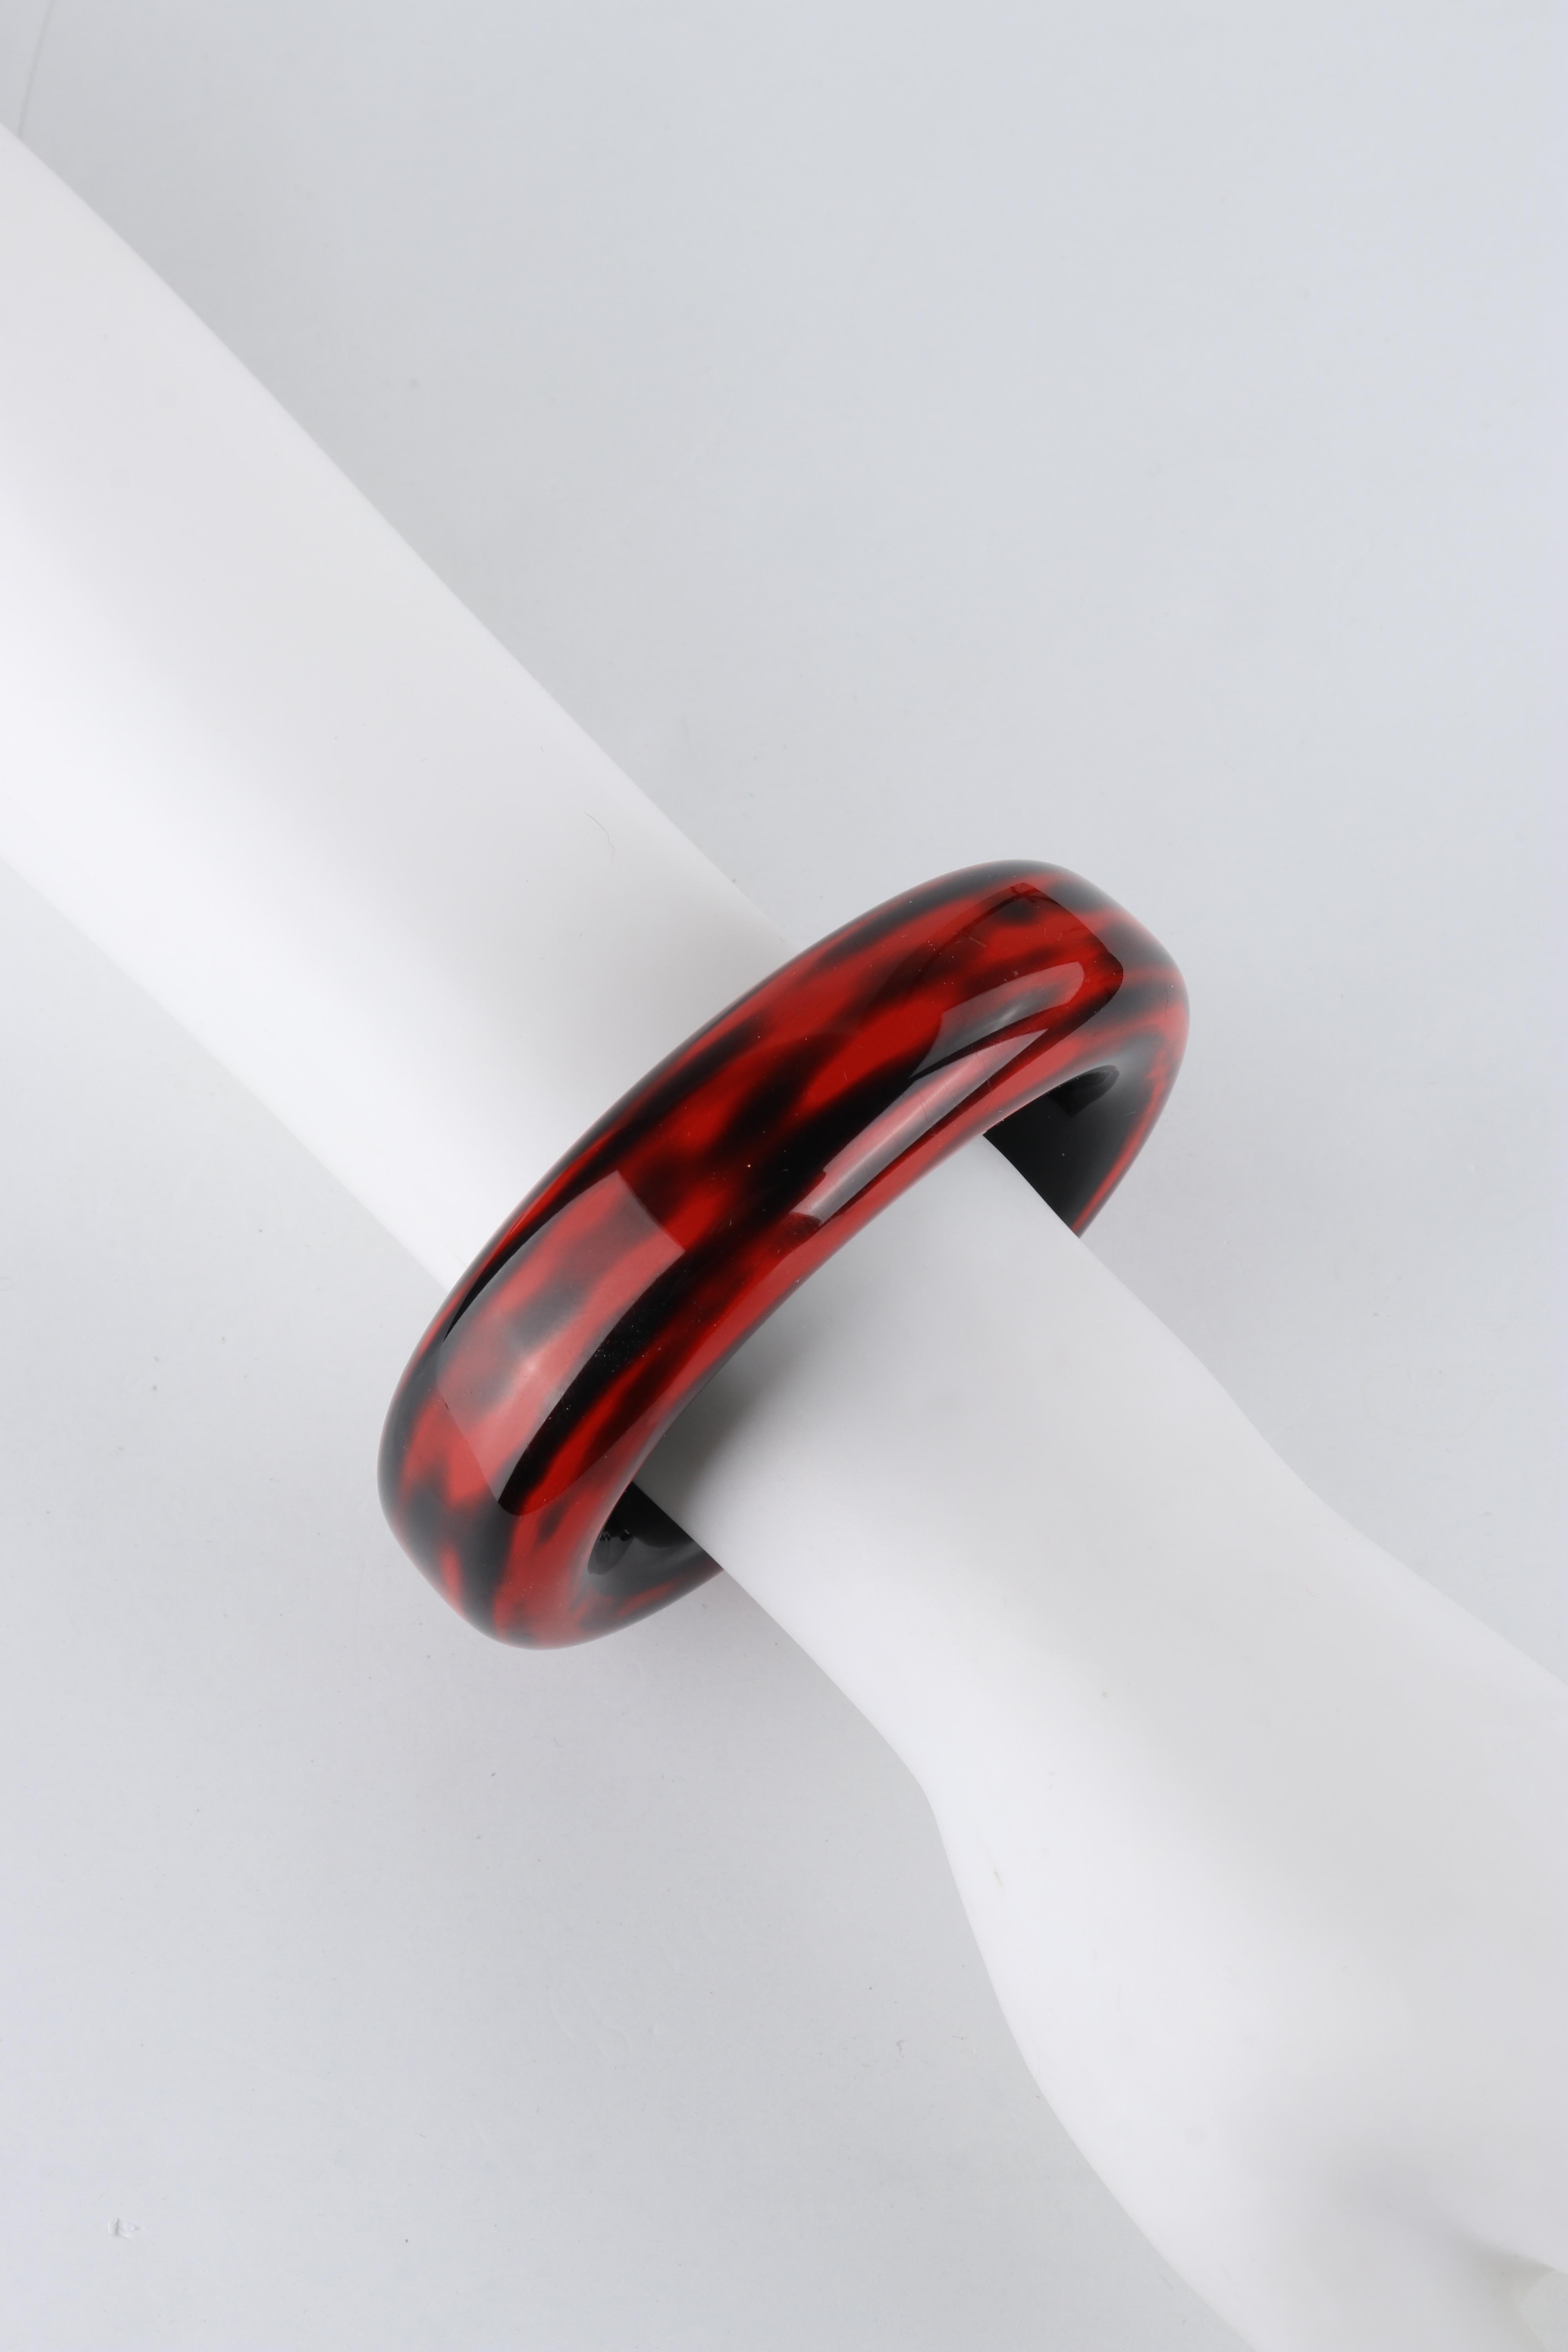 TIFFANY & CO. ELSA PERETTI Black Red Polished Lacquer Hard Wood Bangle Bracelet In Good Condition For Sale In Thiensville, WI